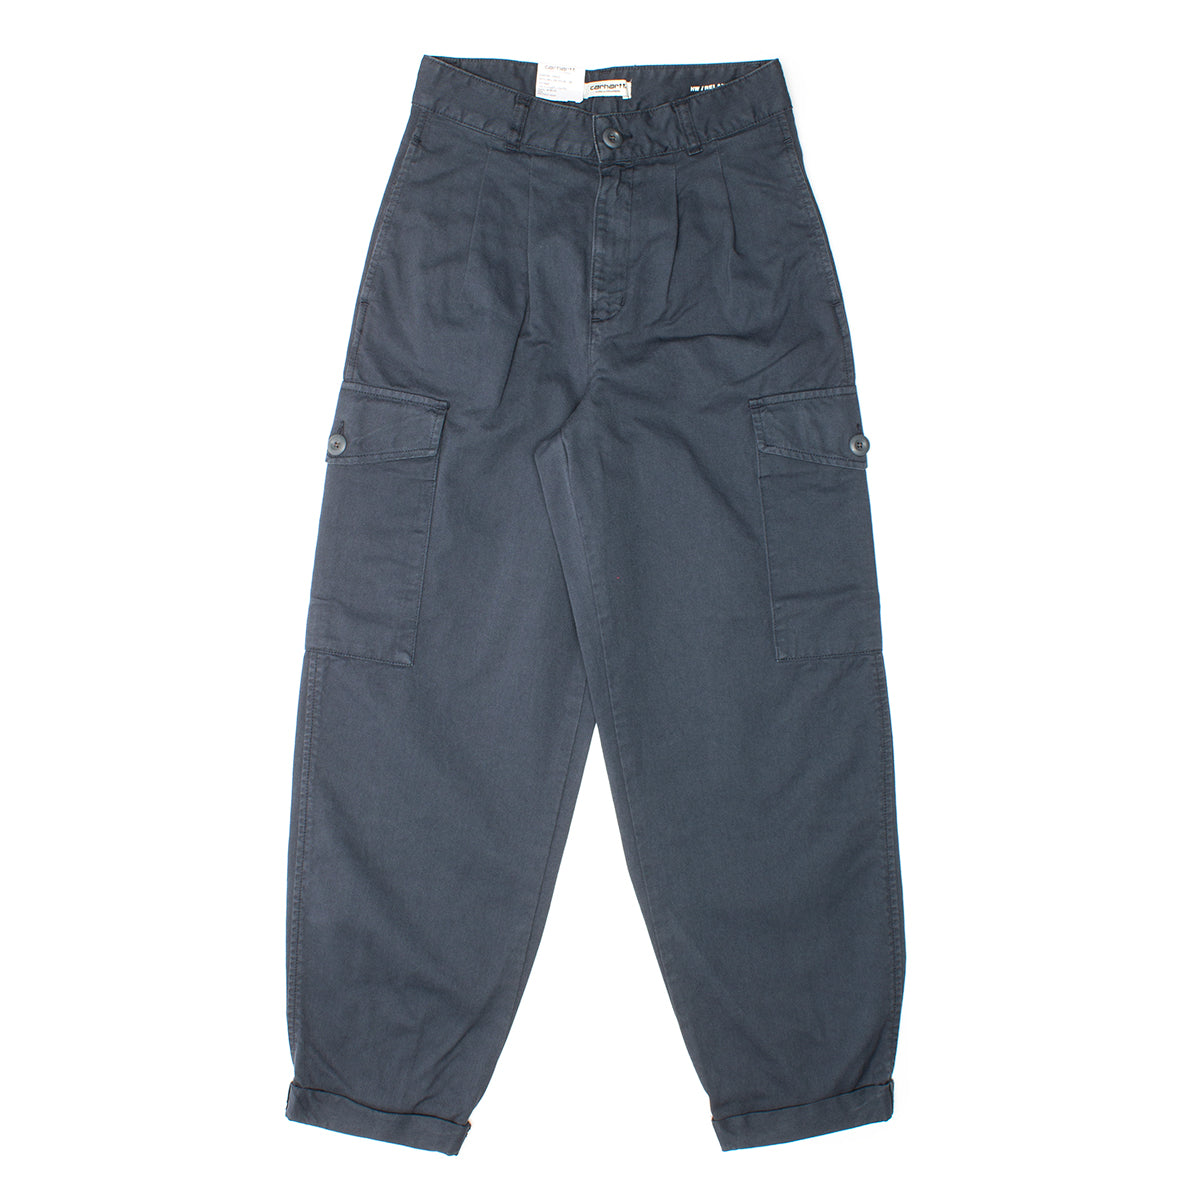 Cargo pants Carhartt WIP Collins Pant Ore garment dyed